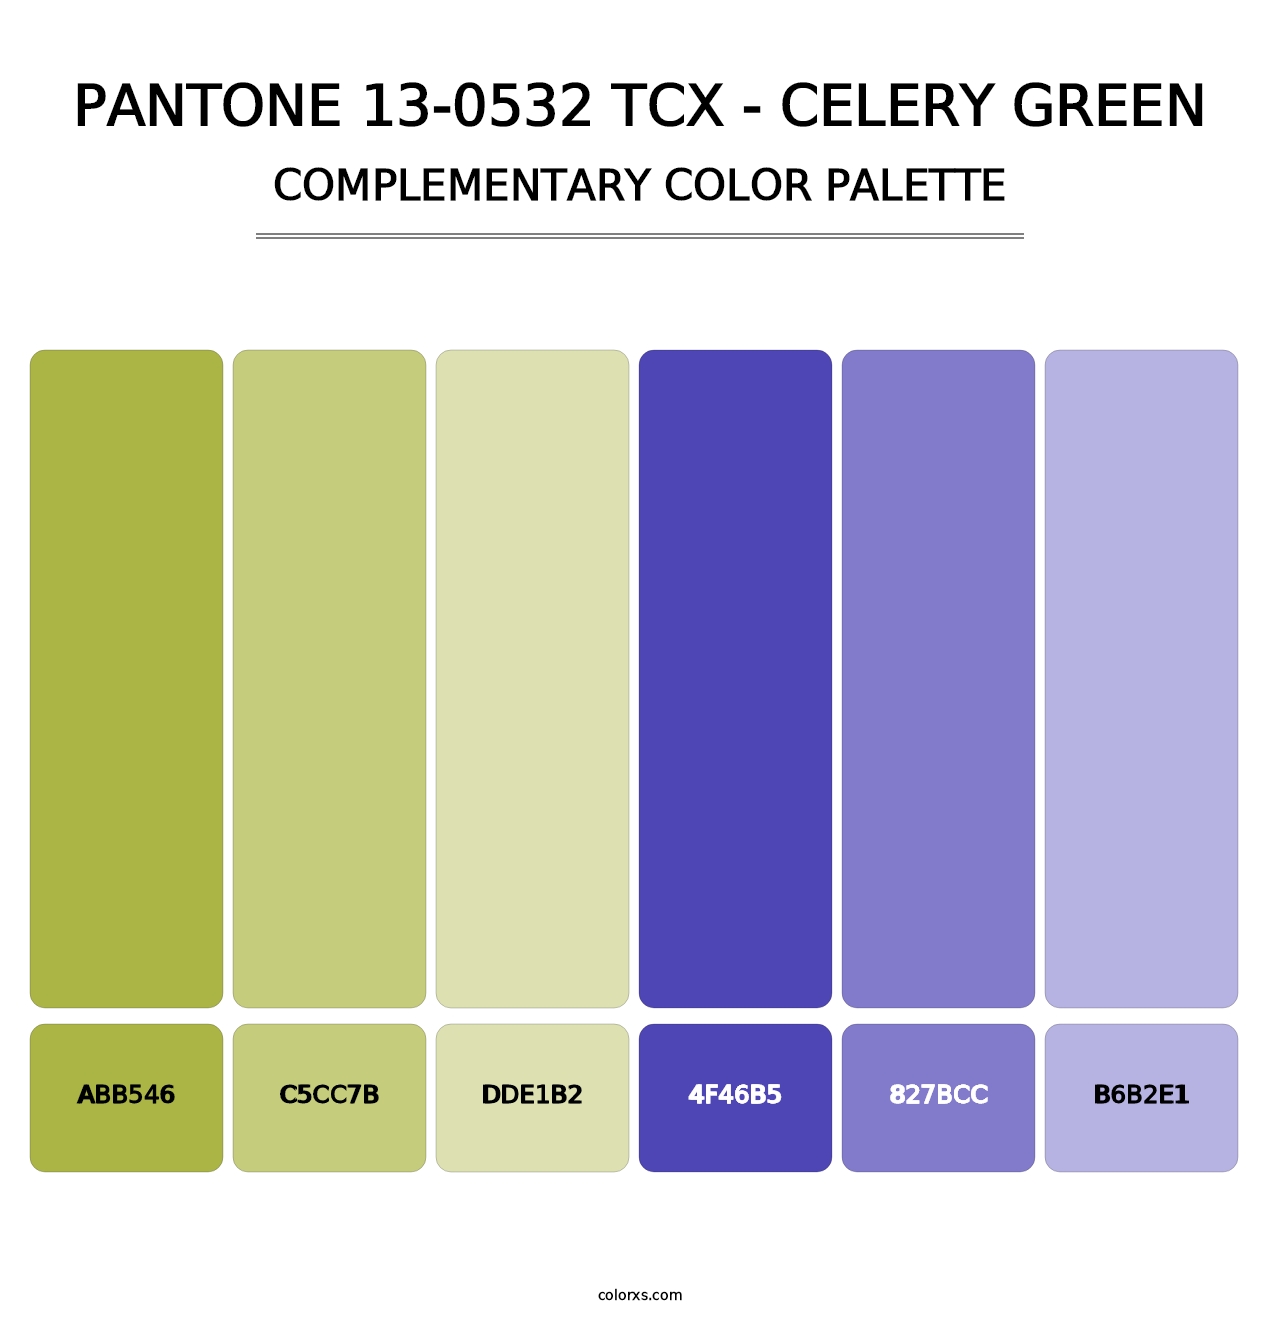 PANTONE 13-0532 TCX - Celery Green - Complementary Color Palette